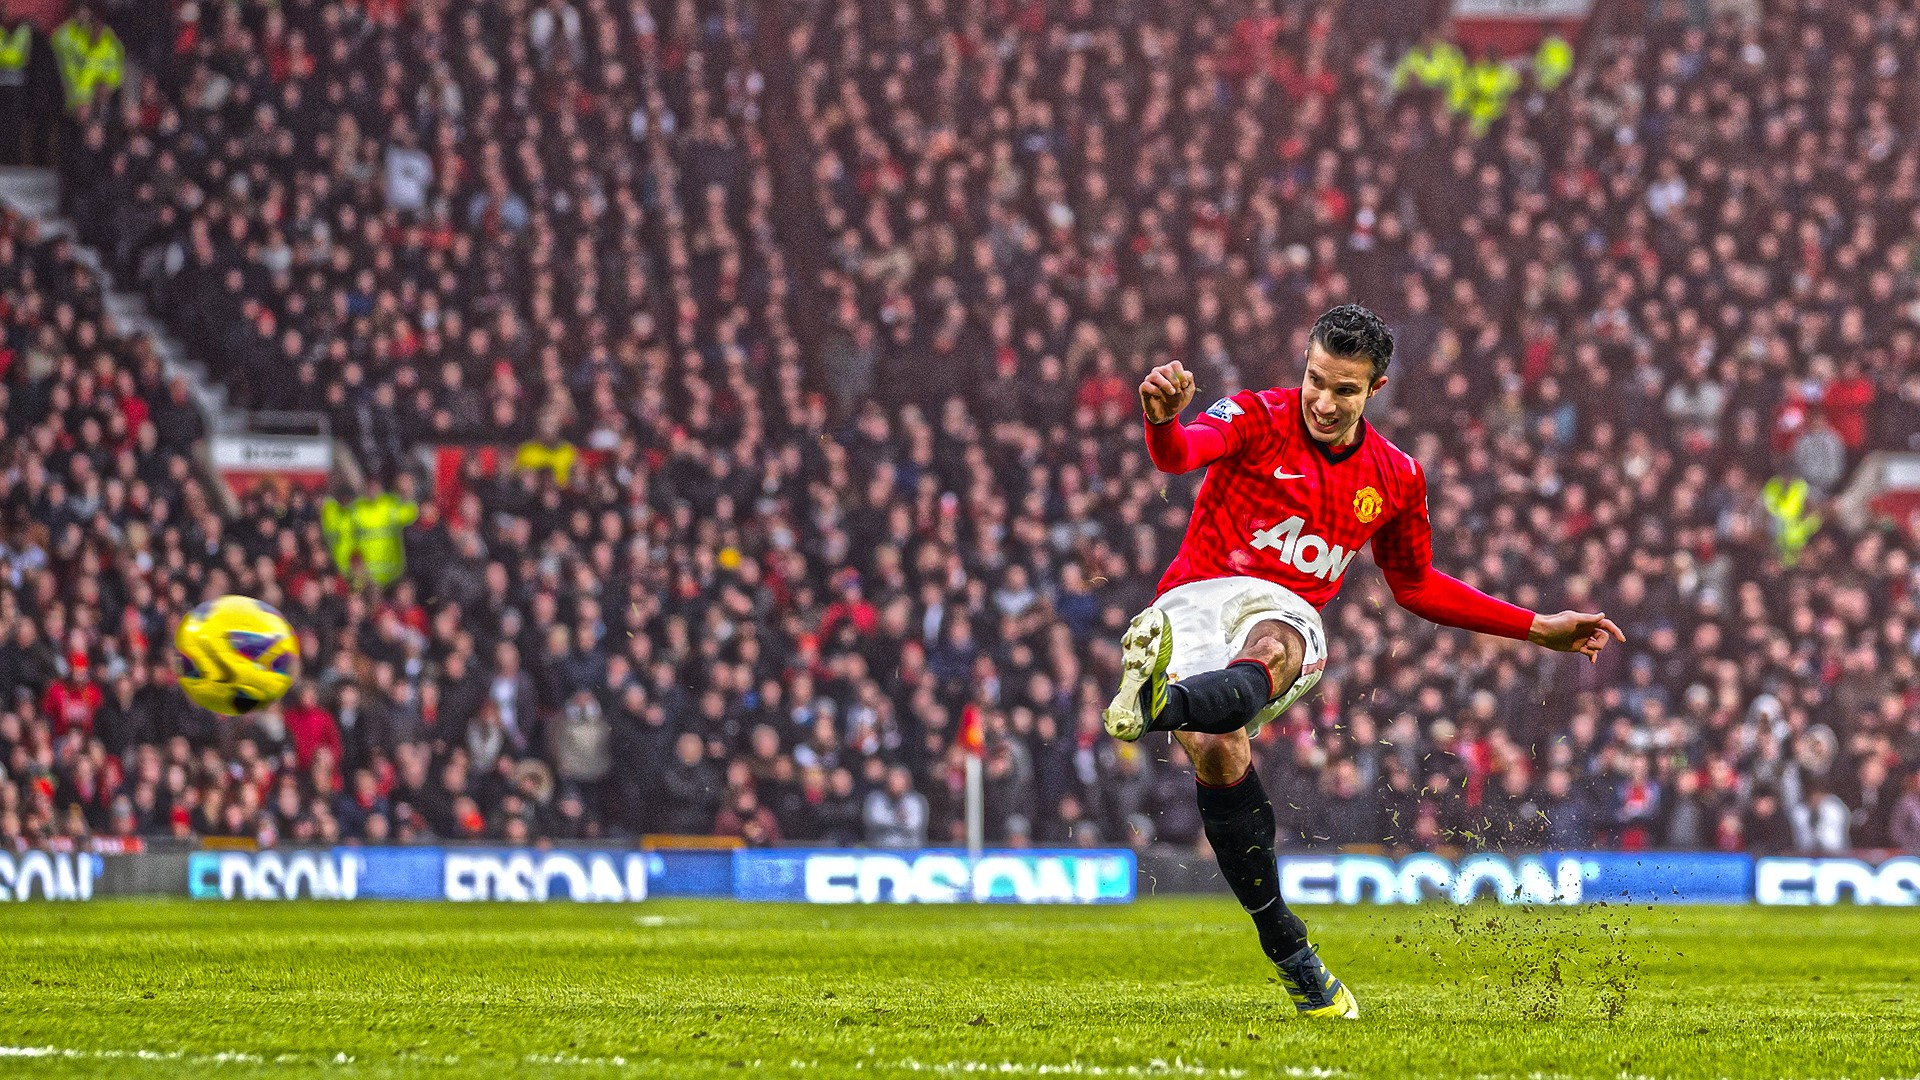 HD wallpaper: Van Persie scored the only goal of the match to give his  country the win. | Wallpaper Flare